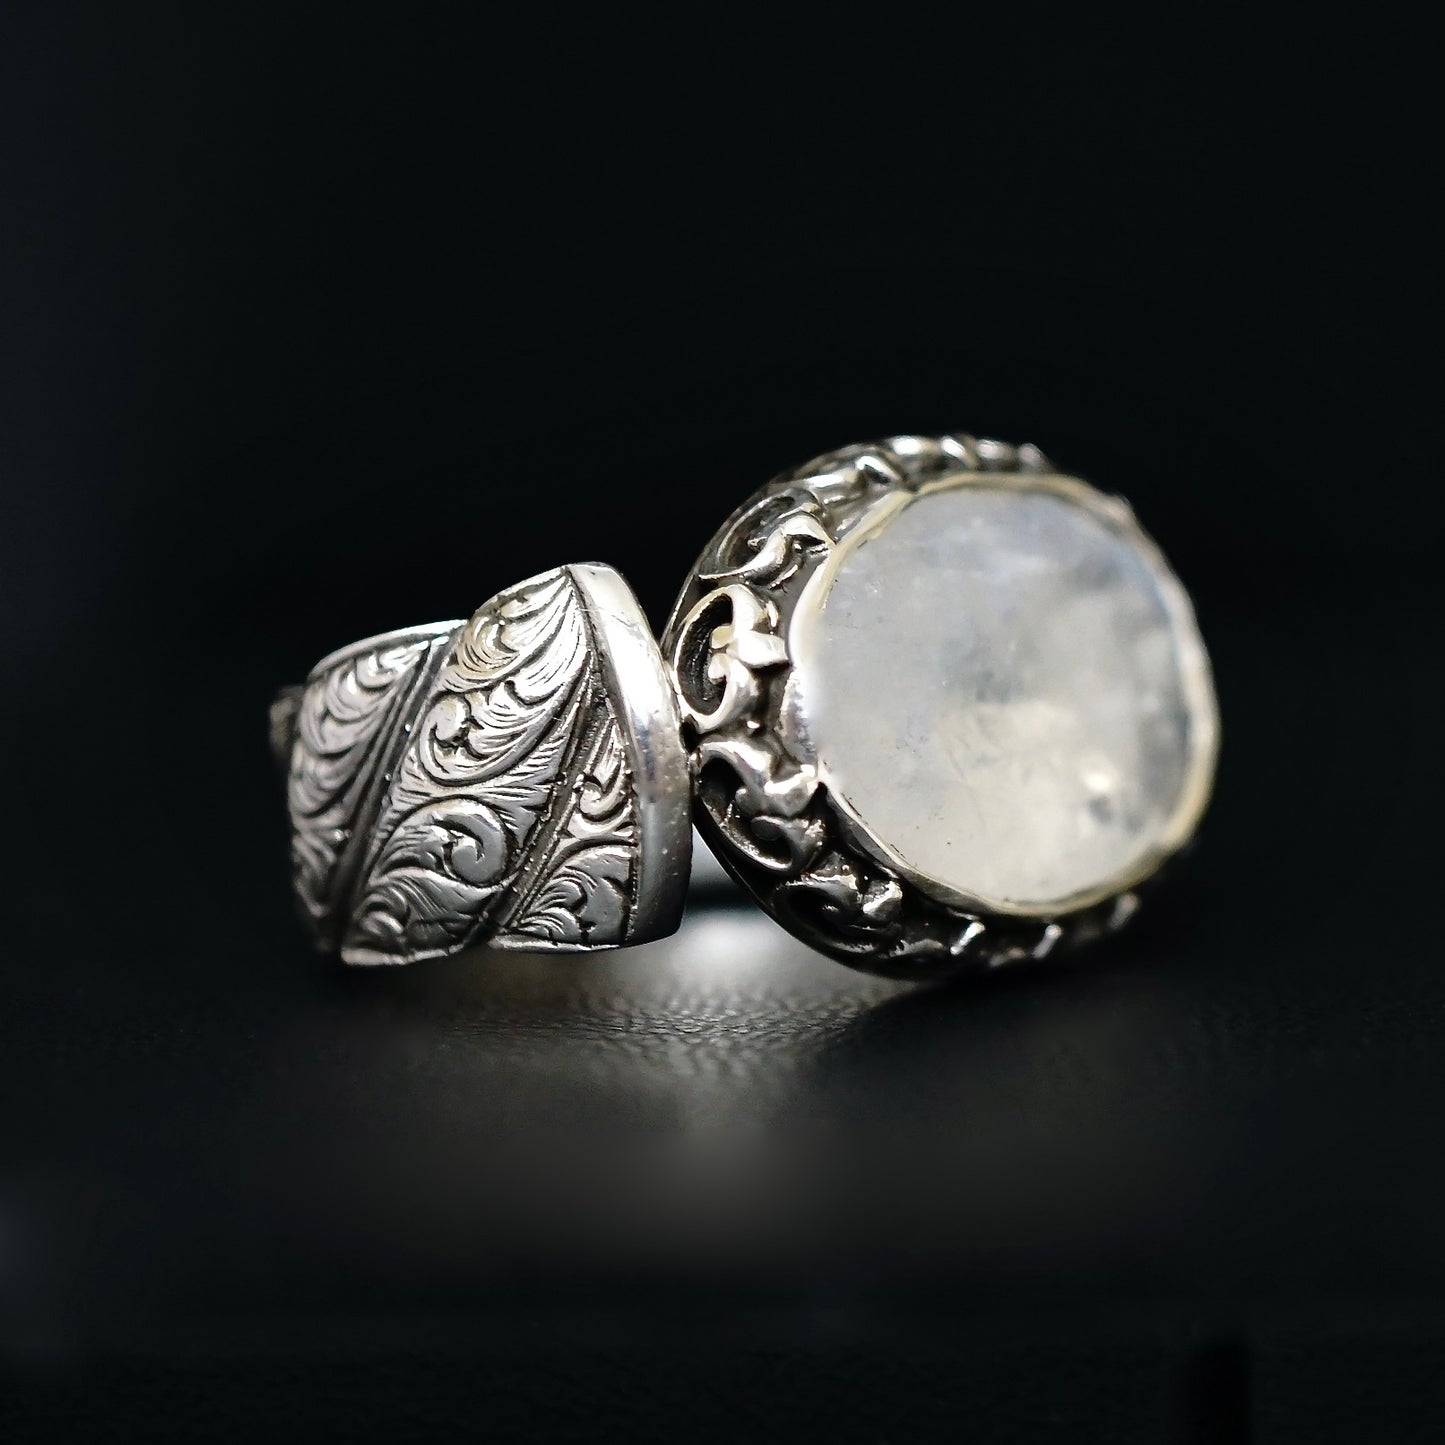 Moonstone Ring Sterling Silver Handmade Unique Men's Jewelry natural selected gemstone size 10